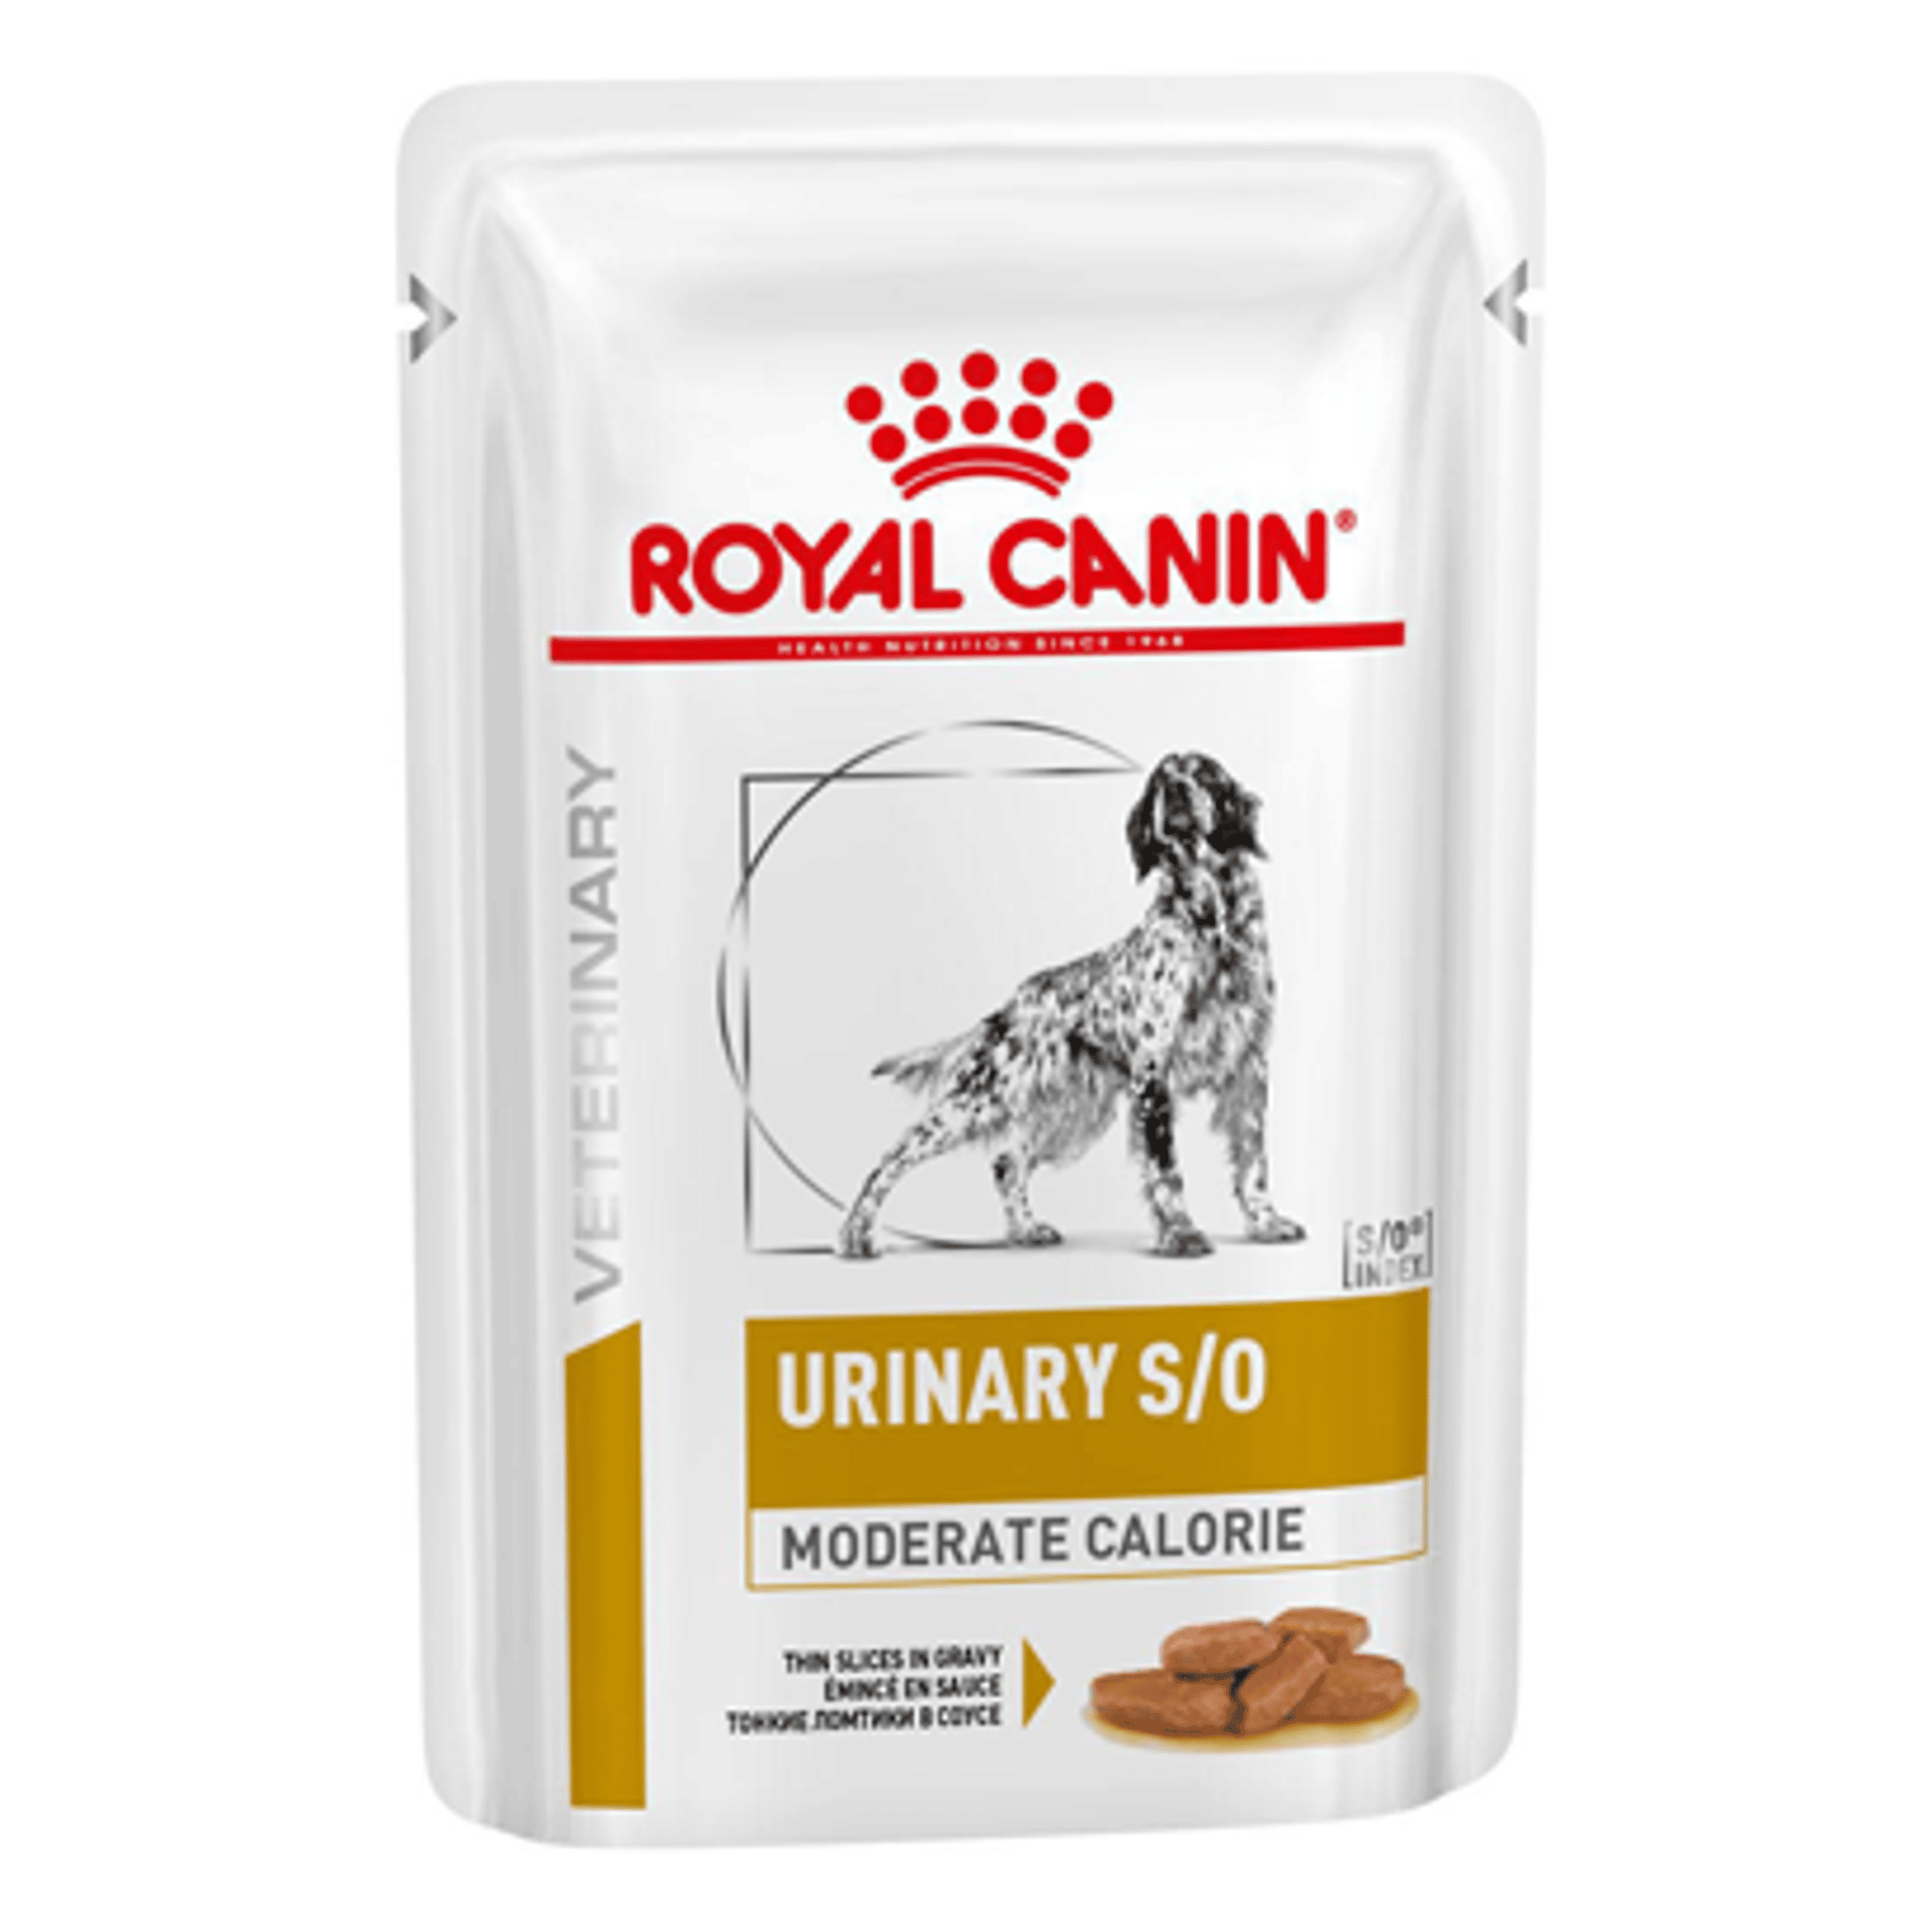 Royal Canin Urinary S/O Moderate Calorie Canine